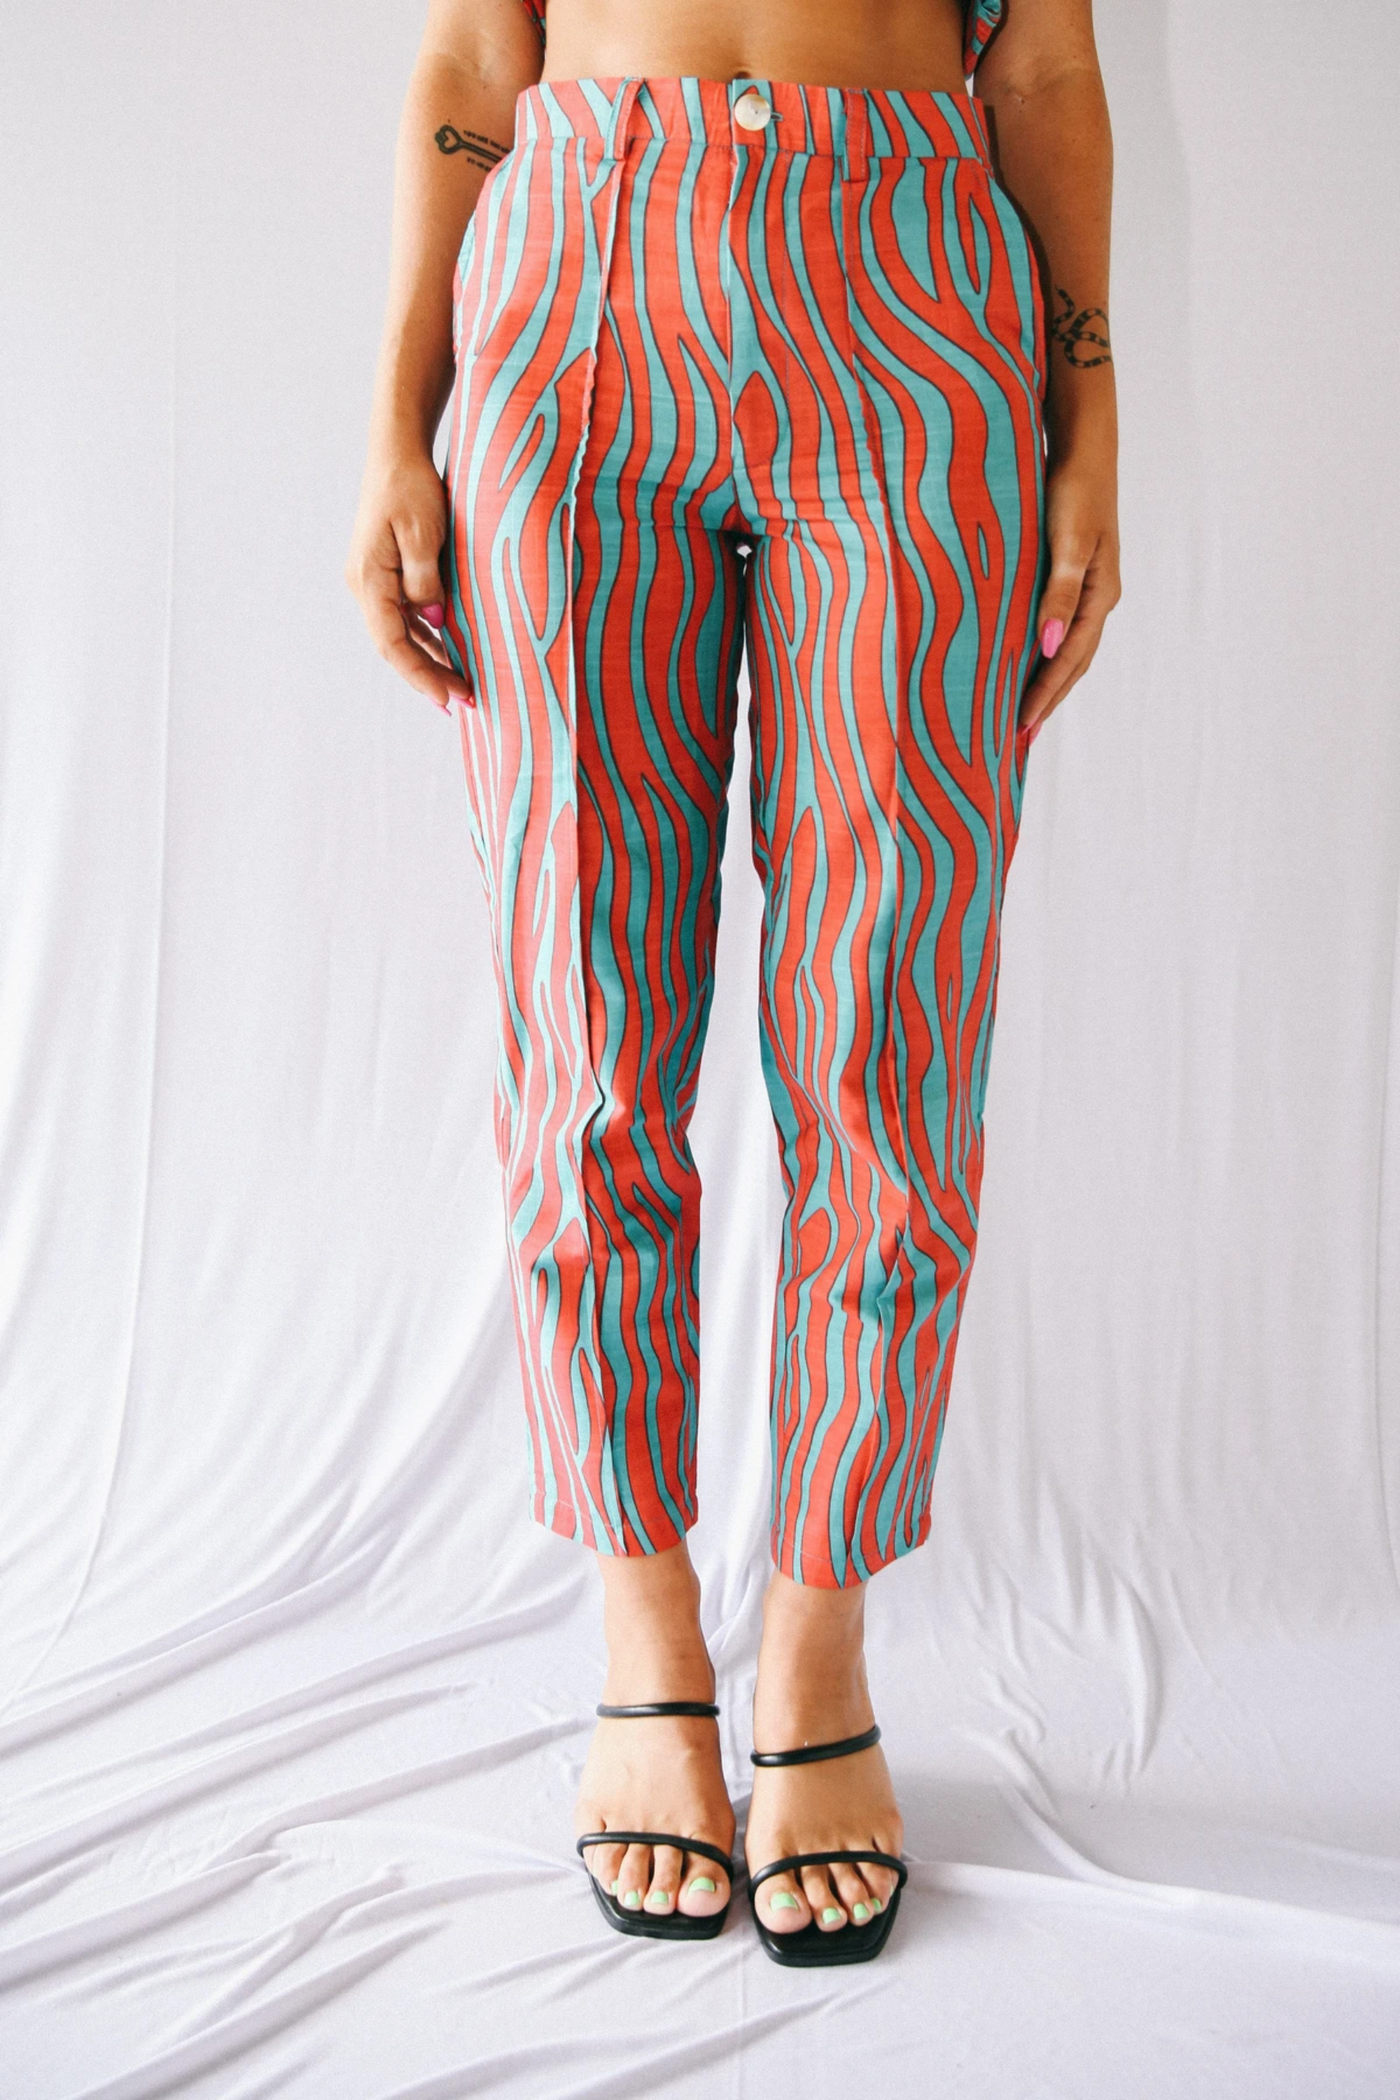 Libra Pants in Acid, available on ZERRIN with free Singapore shipping